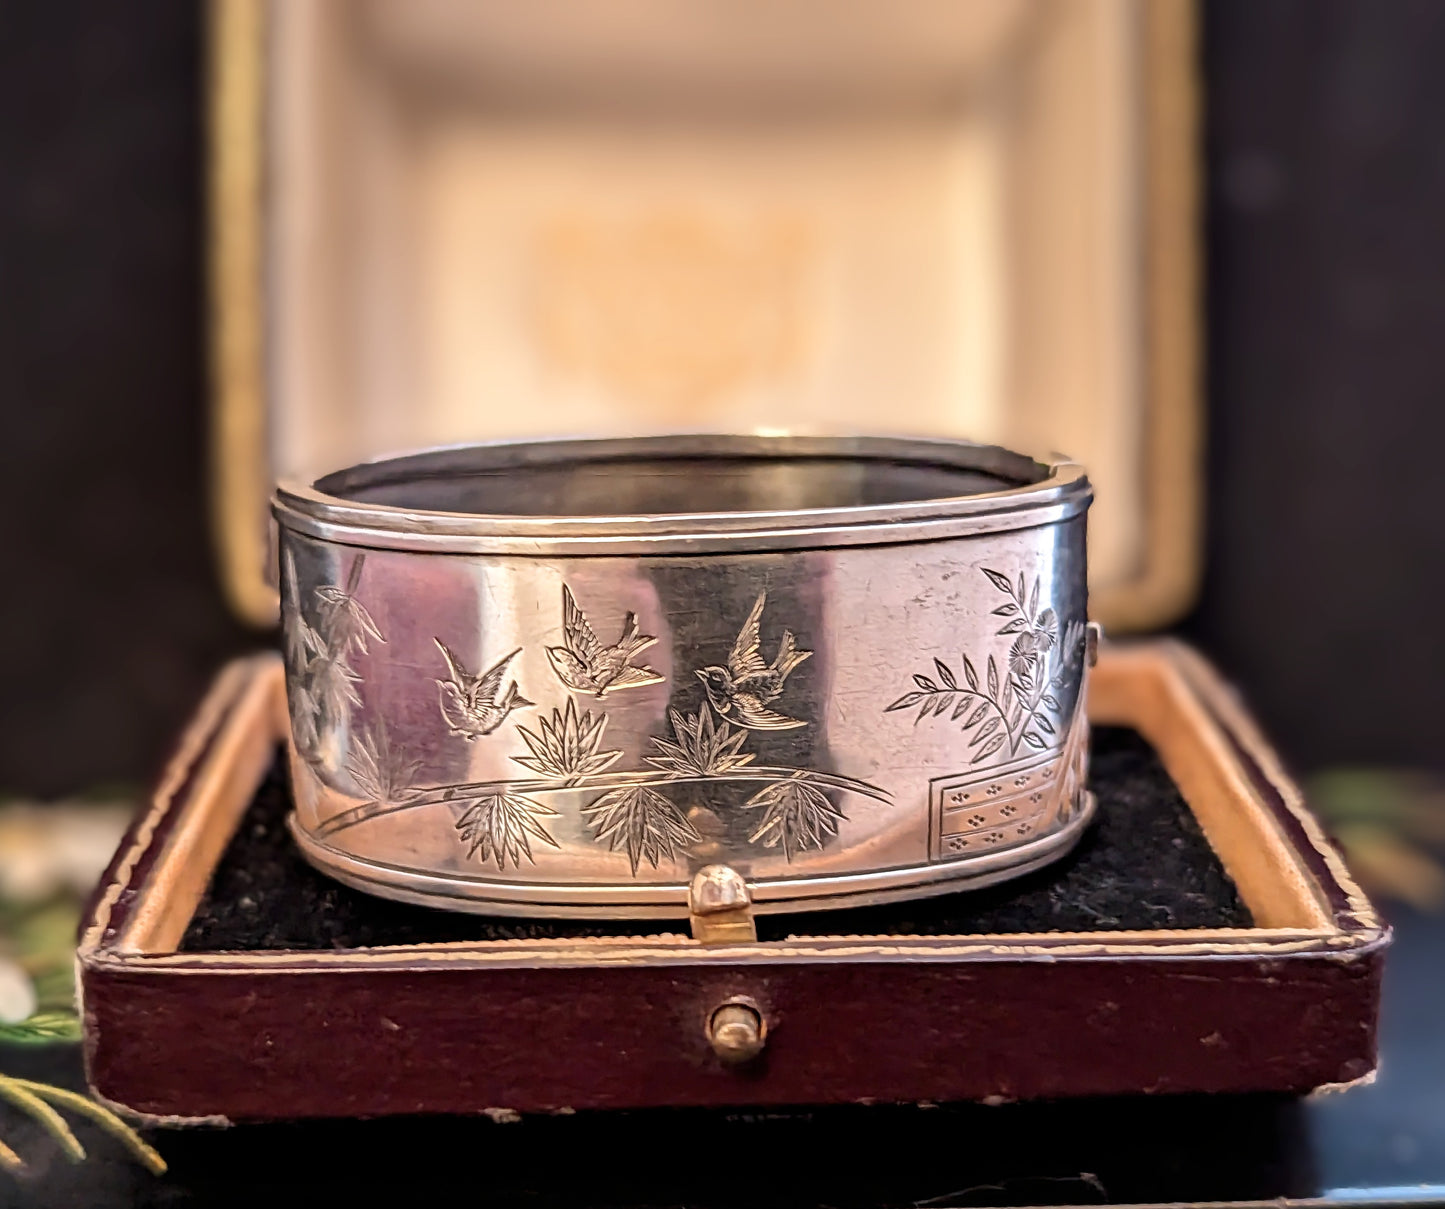 Antique Victorian silver cuff bangle, Aesthetic, Swallows